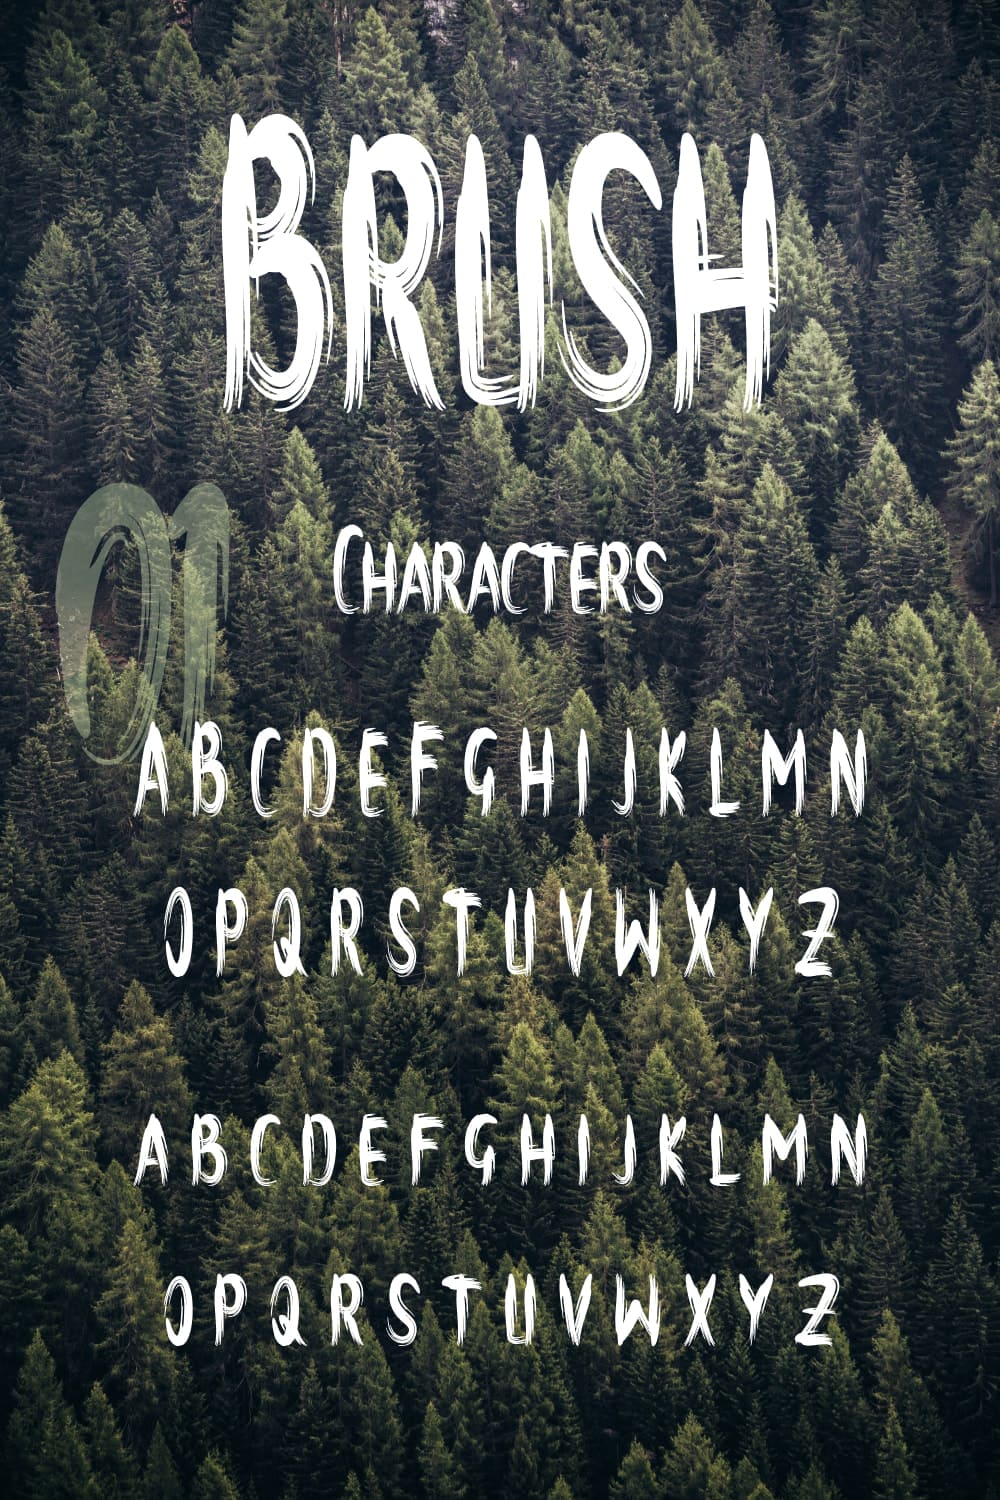 Amazing brush font free Pinterest Characters preview by MasterBundles.